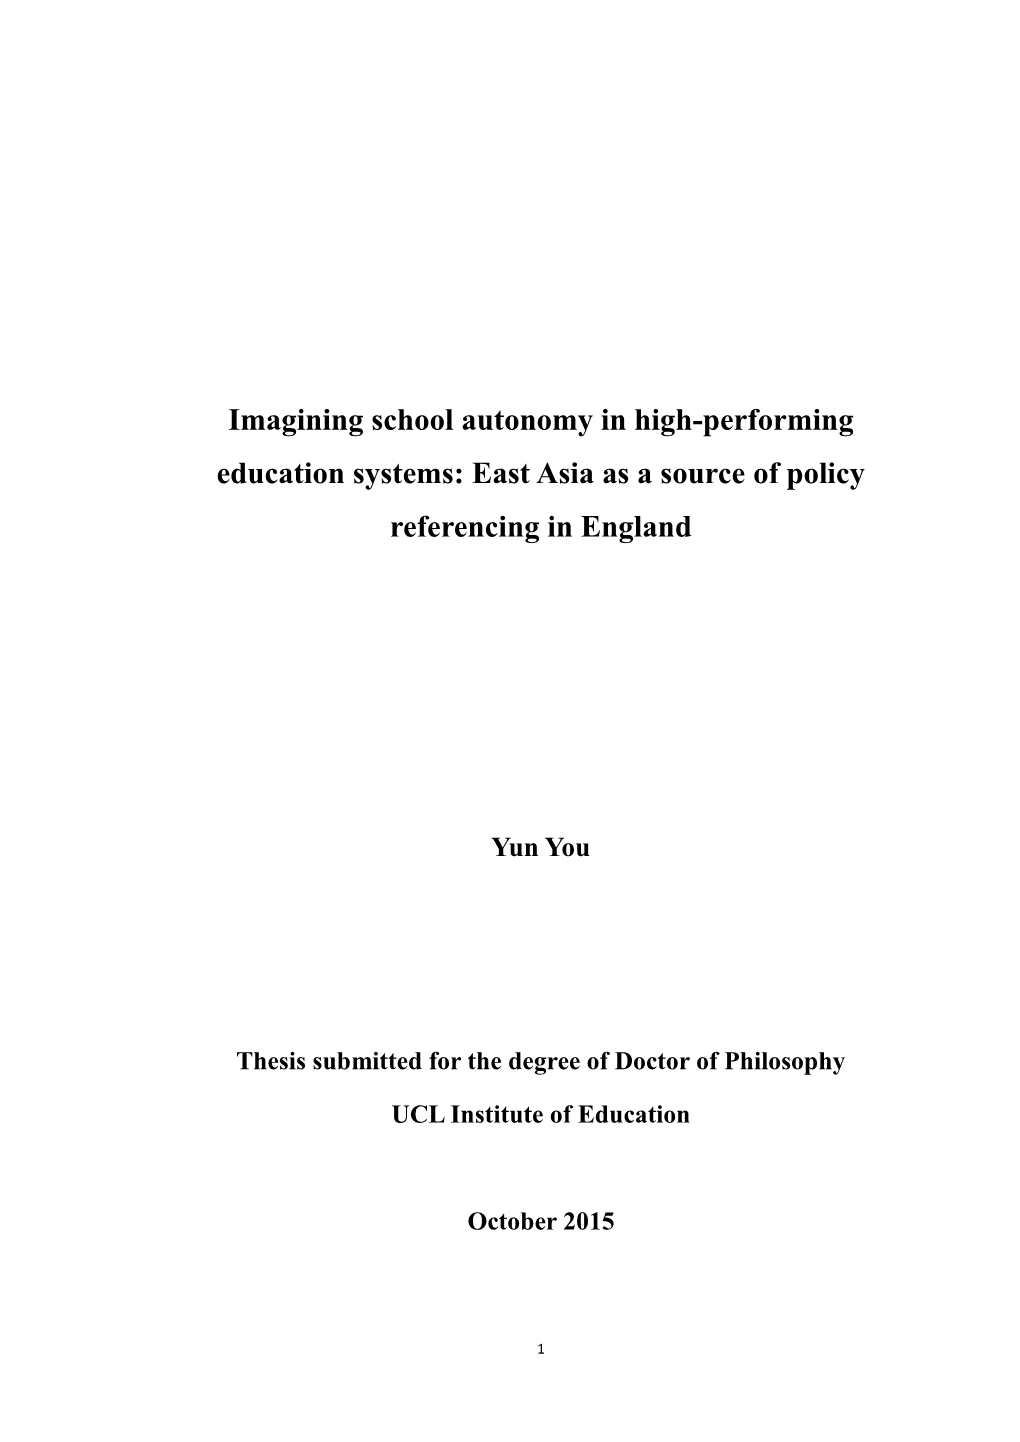 Imagining School Autonomy in High-Performing Education Systems: East Asia As a Source of Policy Referencing in England